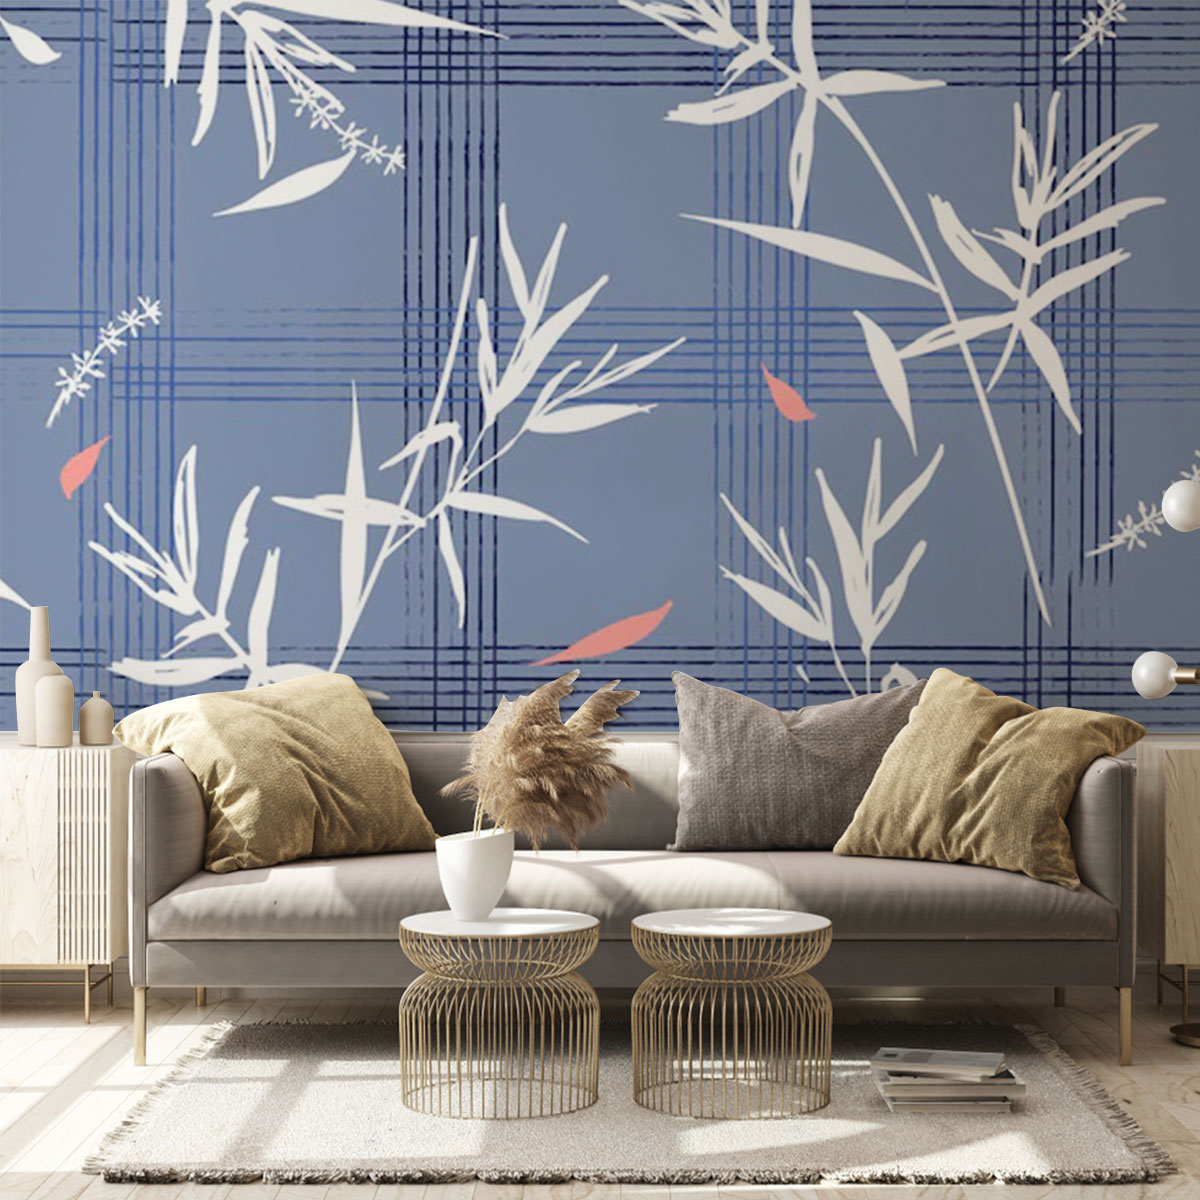 Beautiful With Bamboo Leaves On Blue Wall Mural